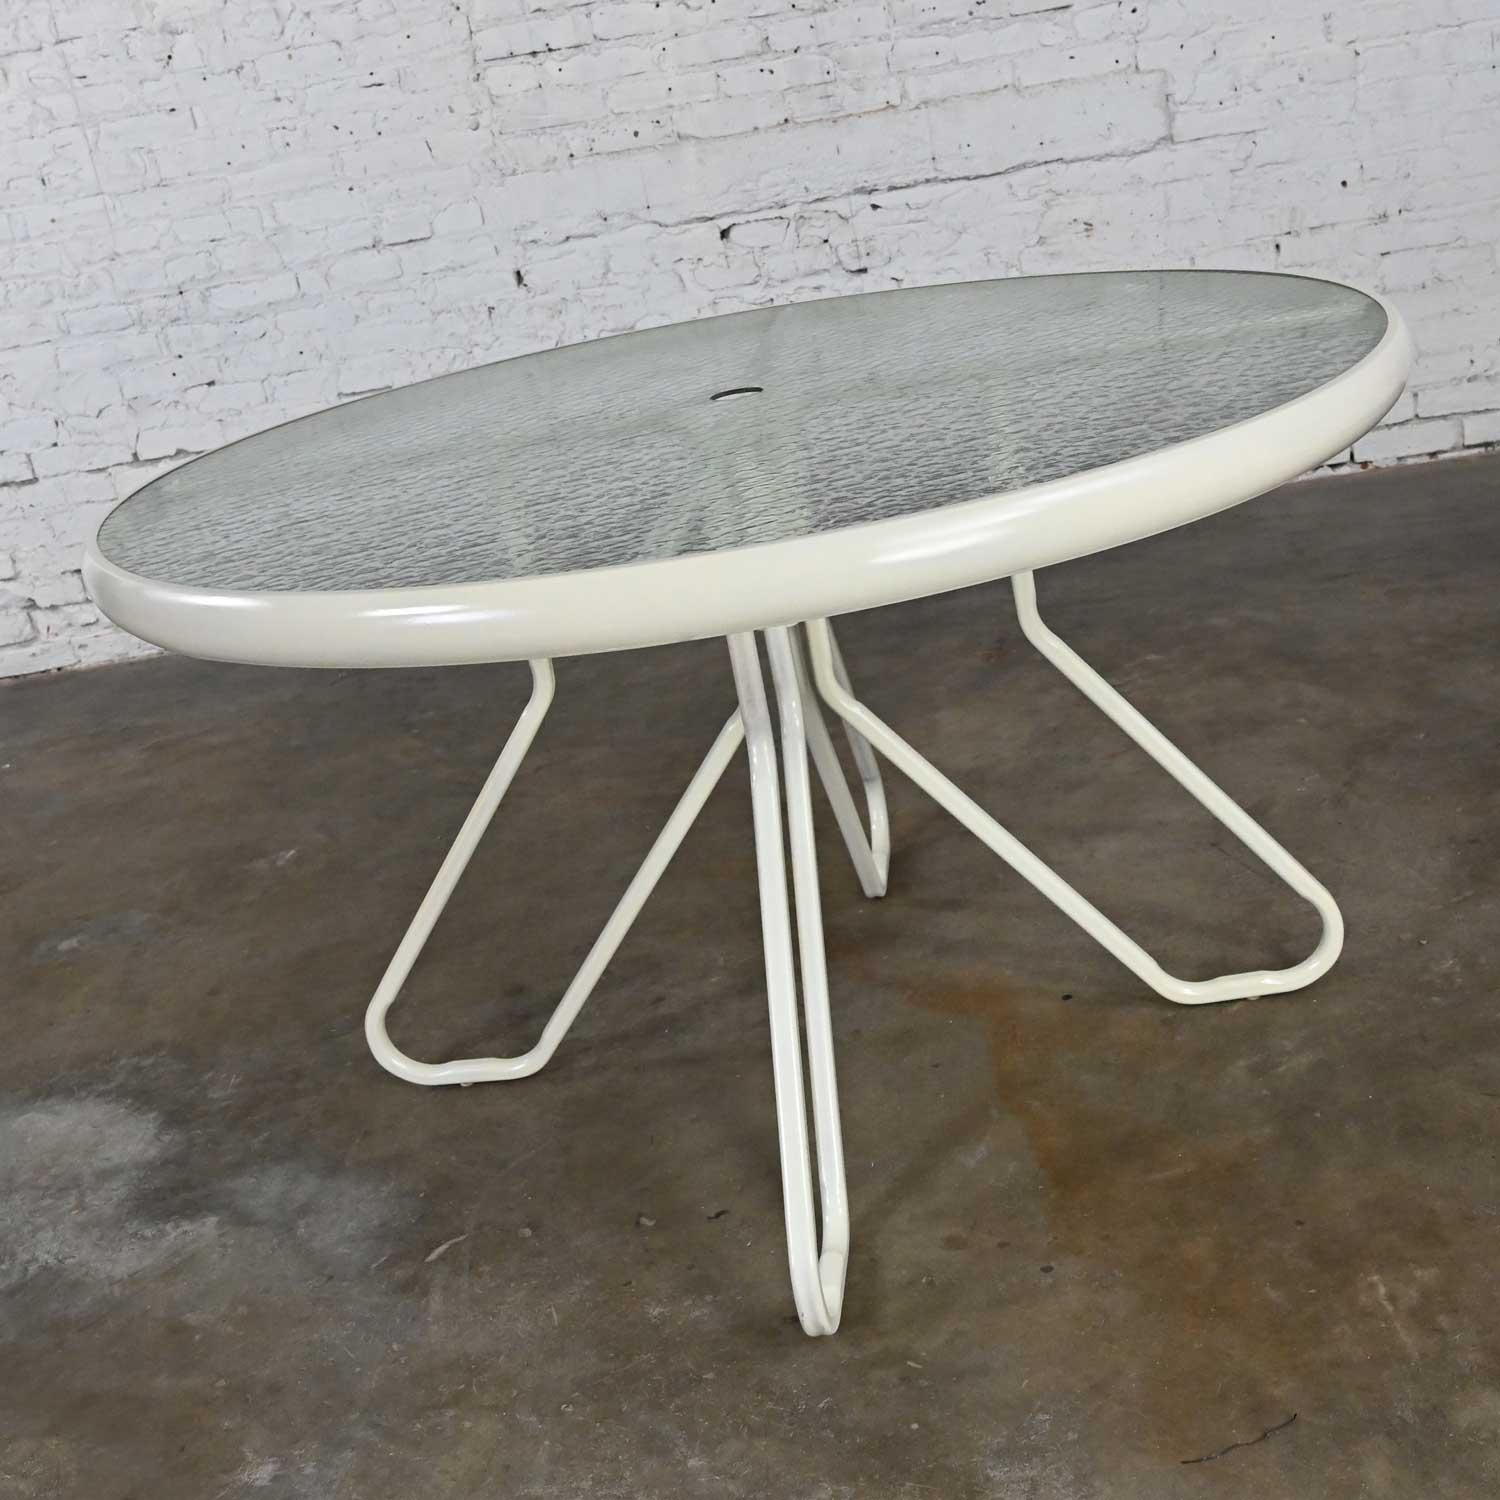 Fabulous vintage MCM outdoor table with paperclip style pedestal base and round dimpled glass top with a wide metal ring and an umbrella hole in the center. Beautiful condition, keeping in mind that this is vintage and not new so will have signs of